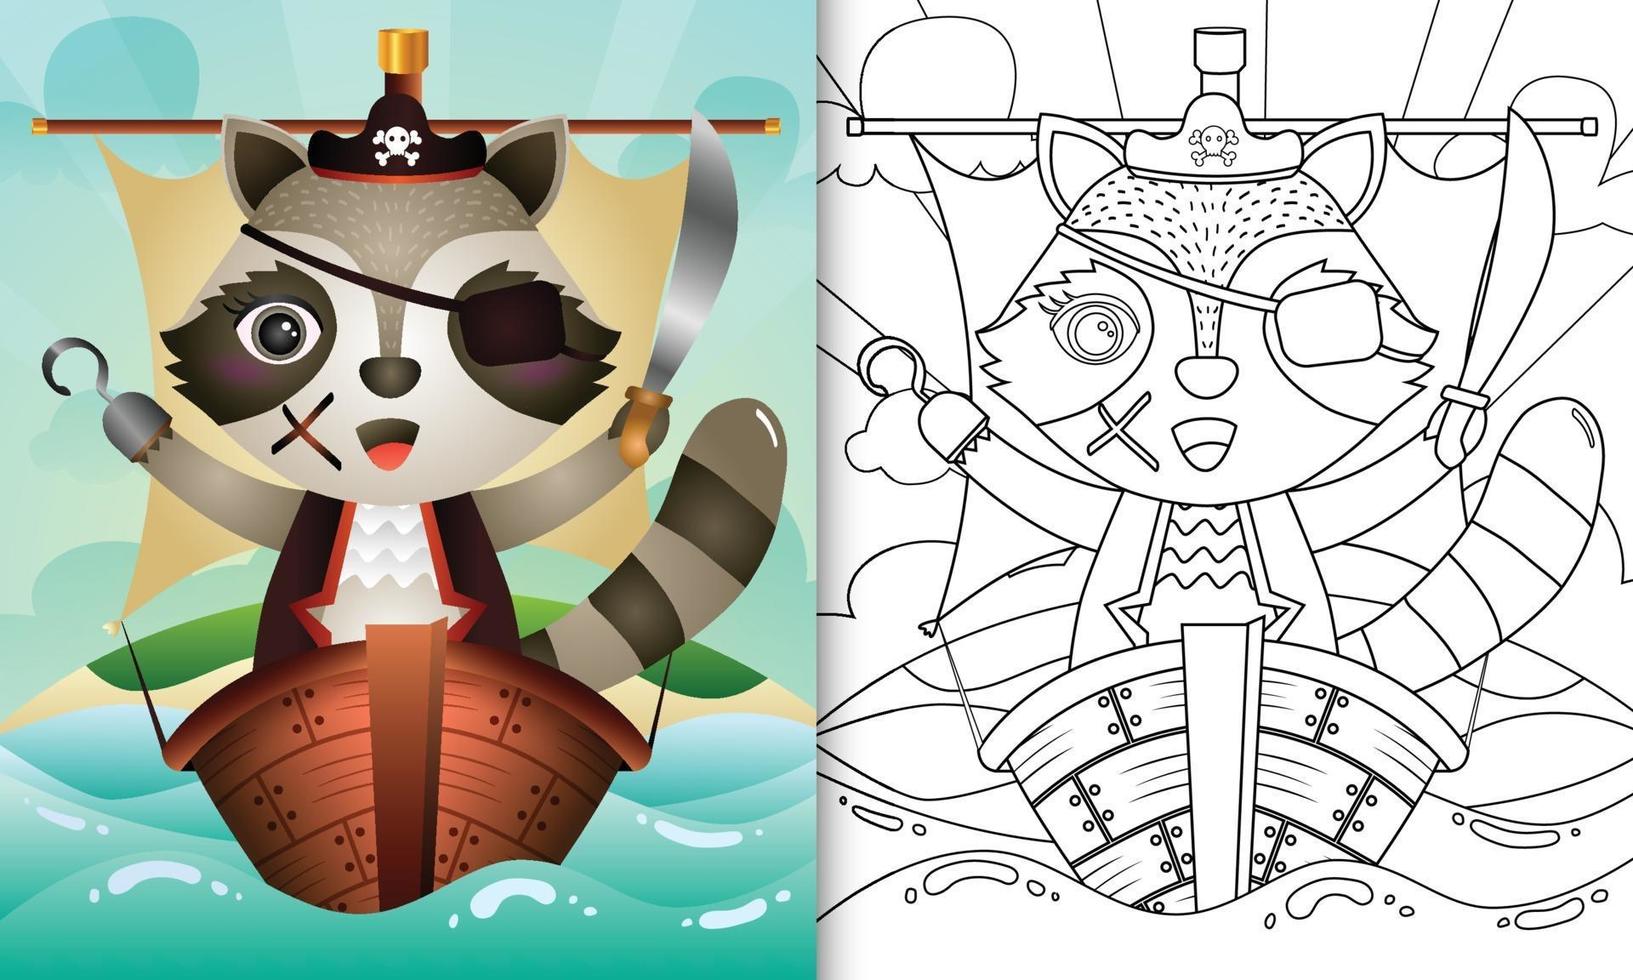 Coloring book for kids with a cute pirate raccoon character illustration vector